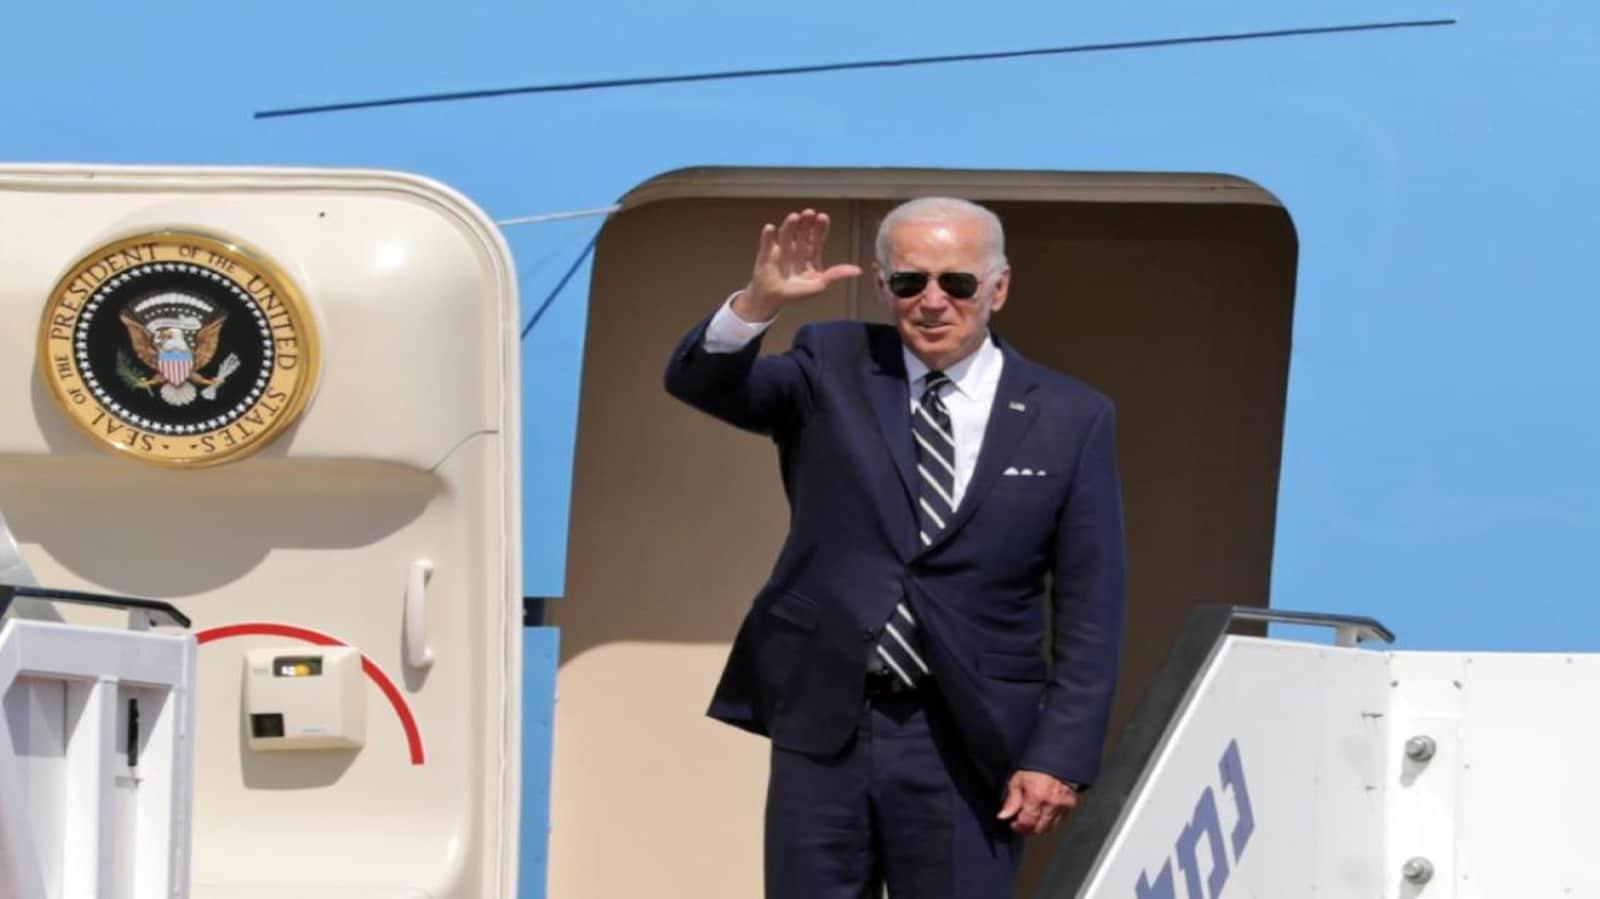 Joe Biden Stumbles Trips For 3rd Time On Air Force One Plane